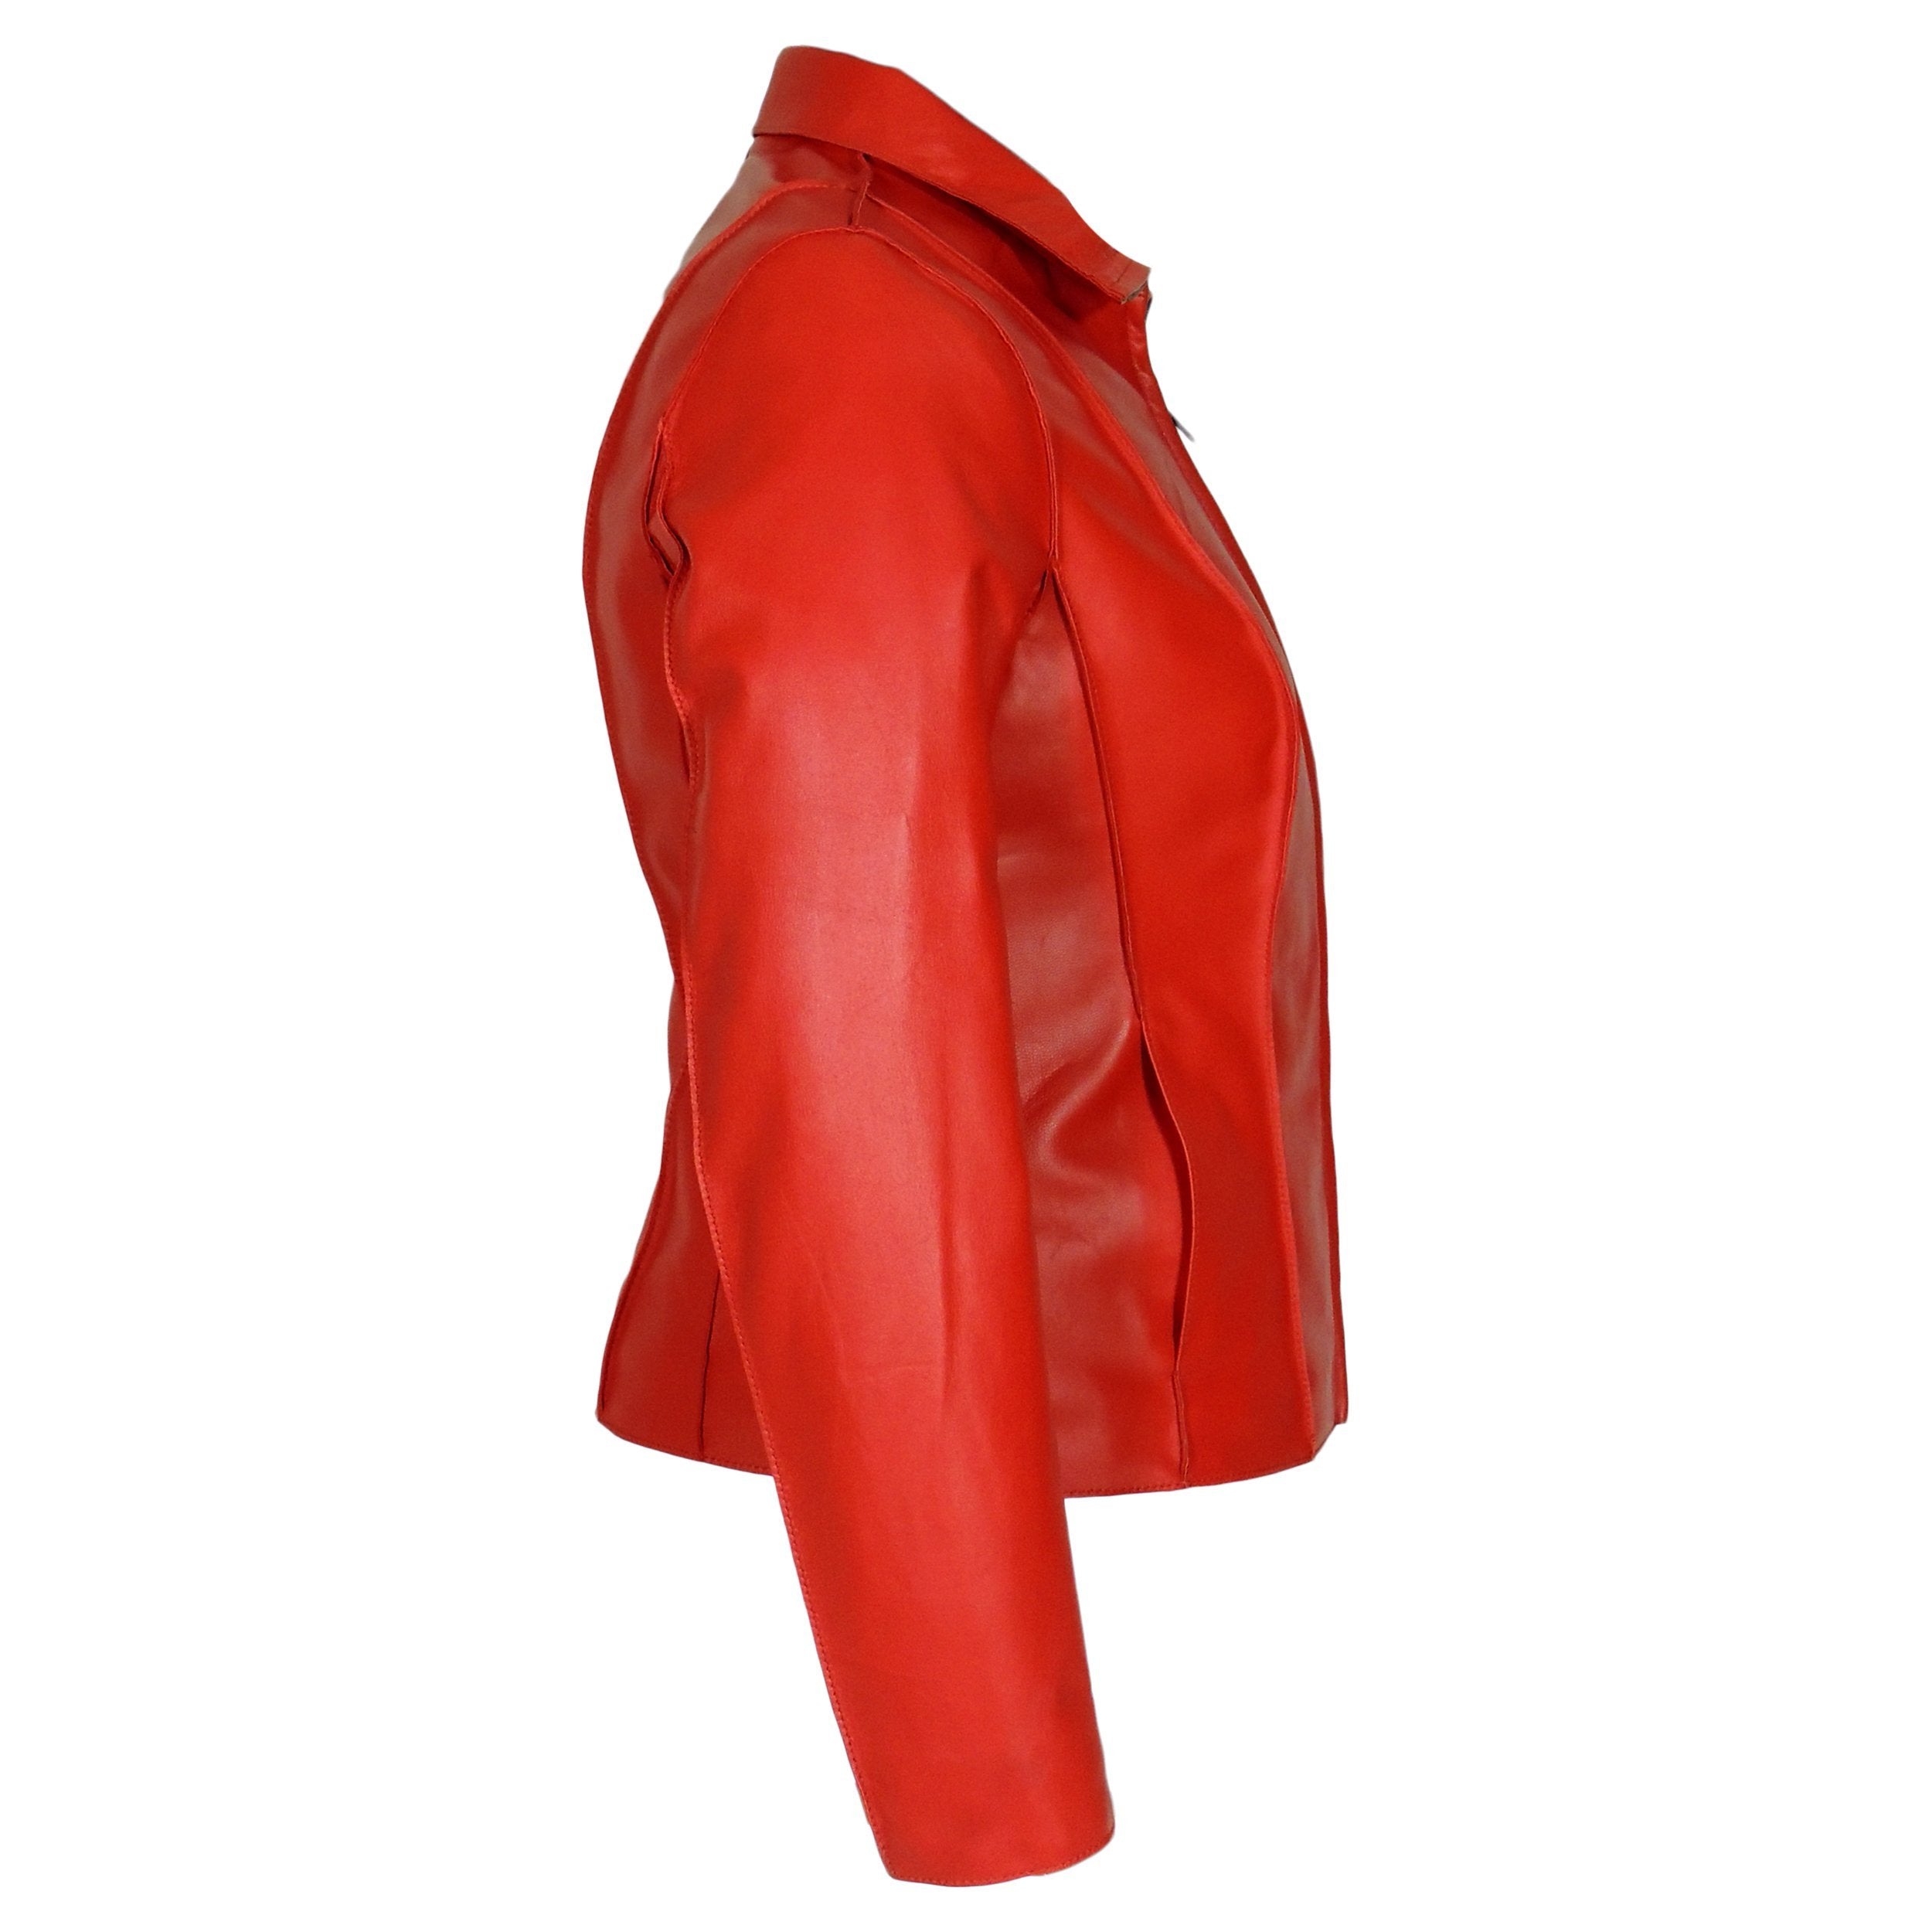 Picture of a Women's Professional Stunner Sheepskin Leather Jacket red side view.